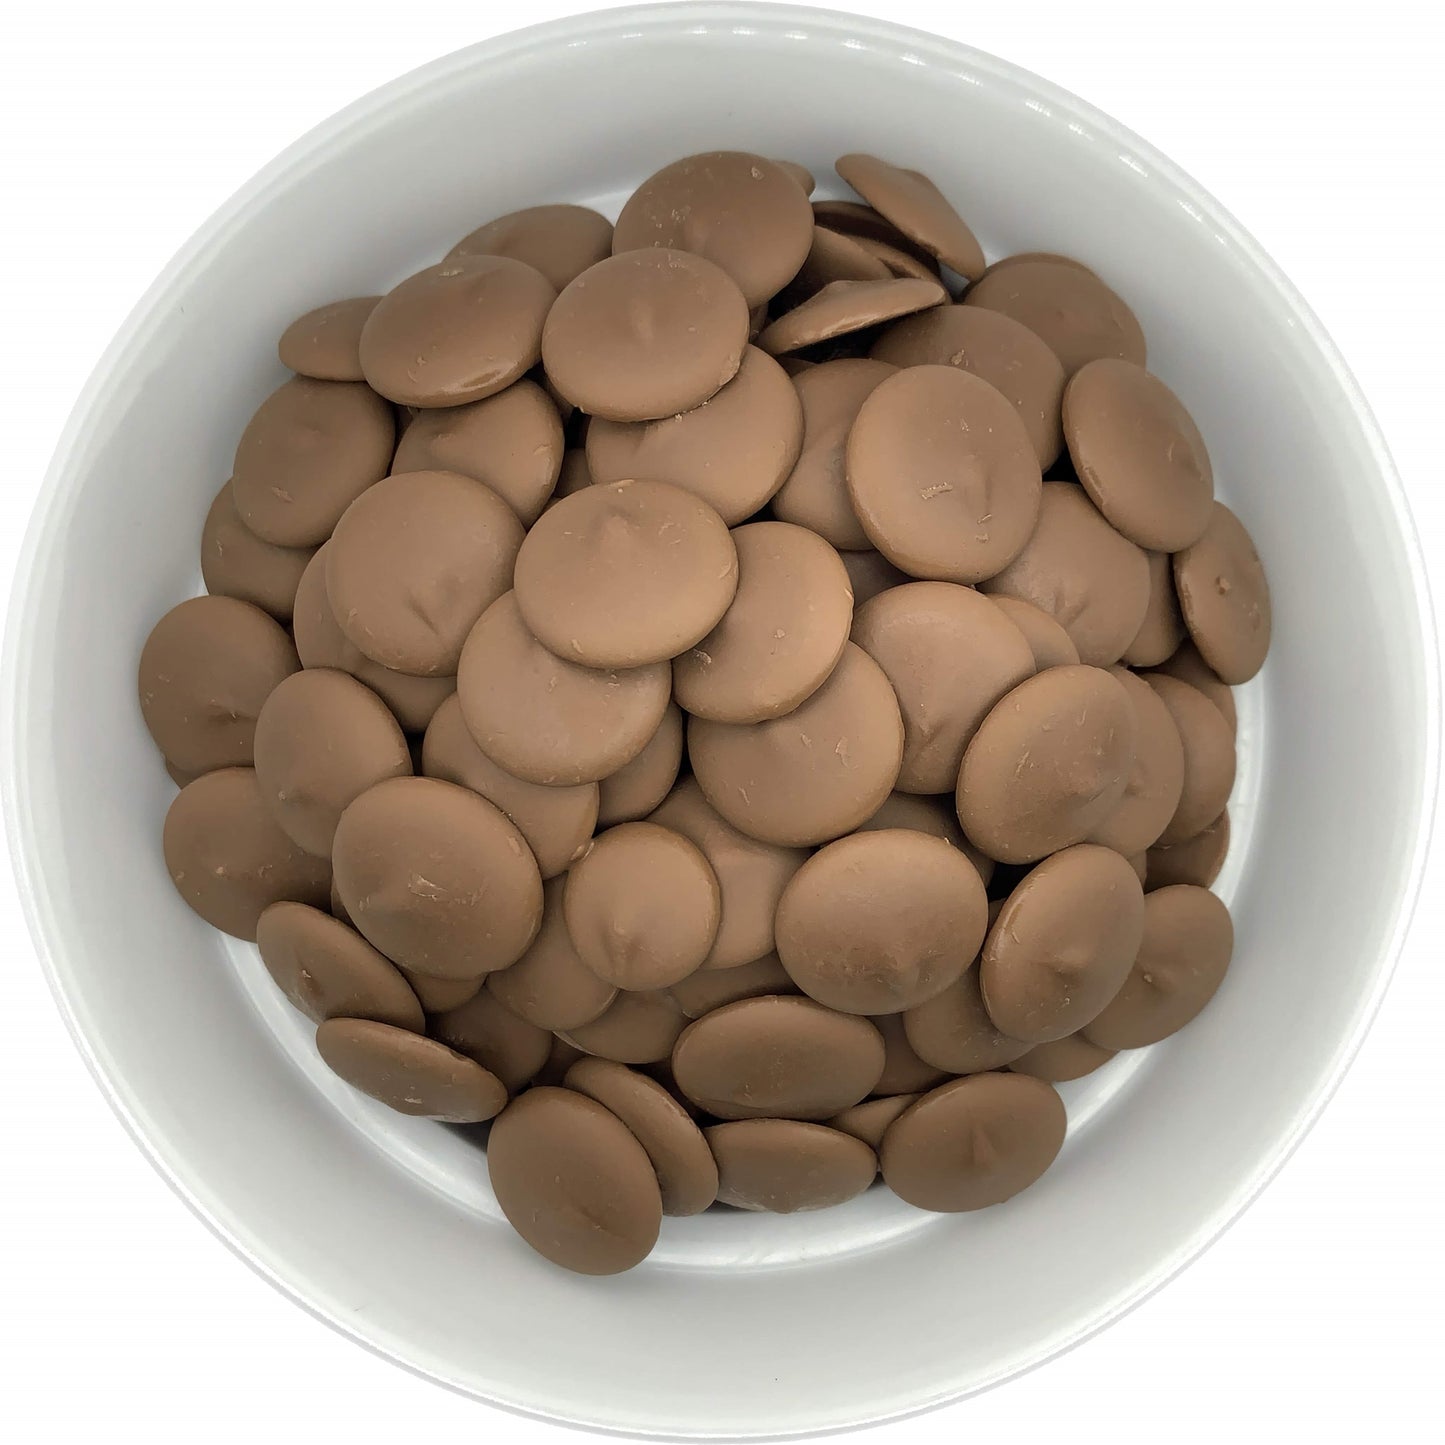 Merckens Cocoa Lite Milk Chocolate Melting Wafers in a white bowl, showcasing their smooth, creamy texture perfect for molding and dipping confections.